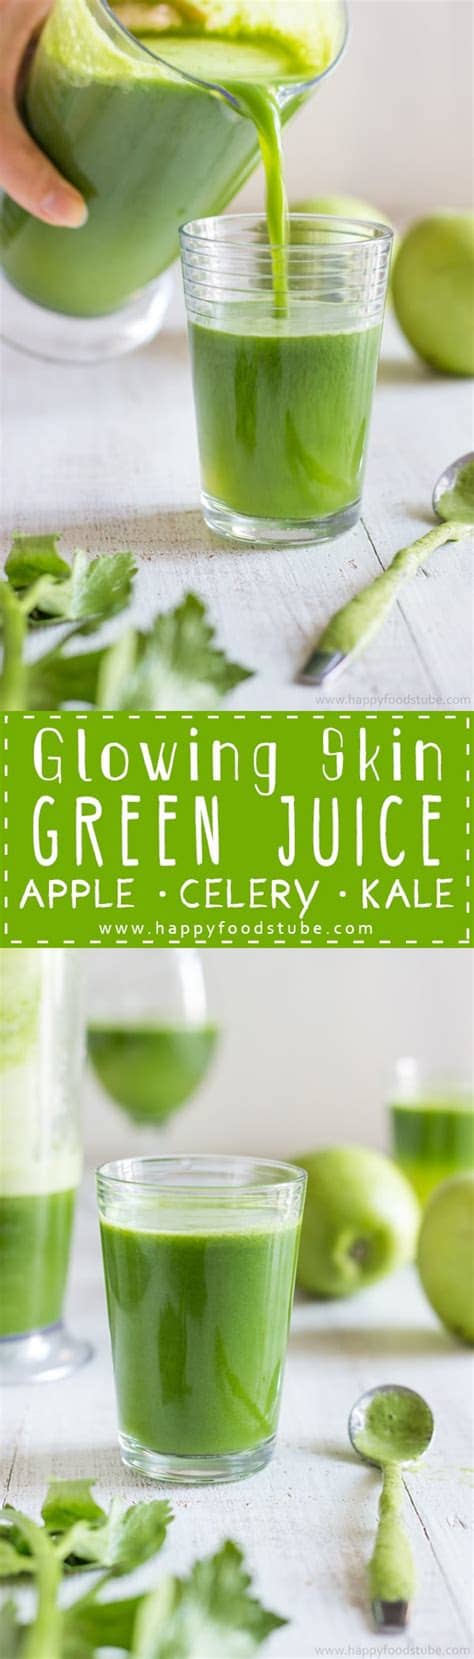 There are lots of awesome healthy juice recipes to try, and you'll find that they will improve your health in many ways. Glowing Skin Green Juice Recipe - Happy Foods Tube